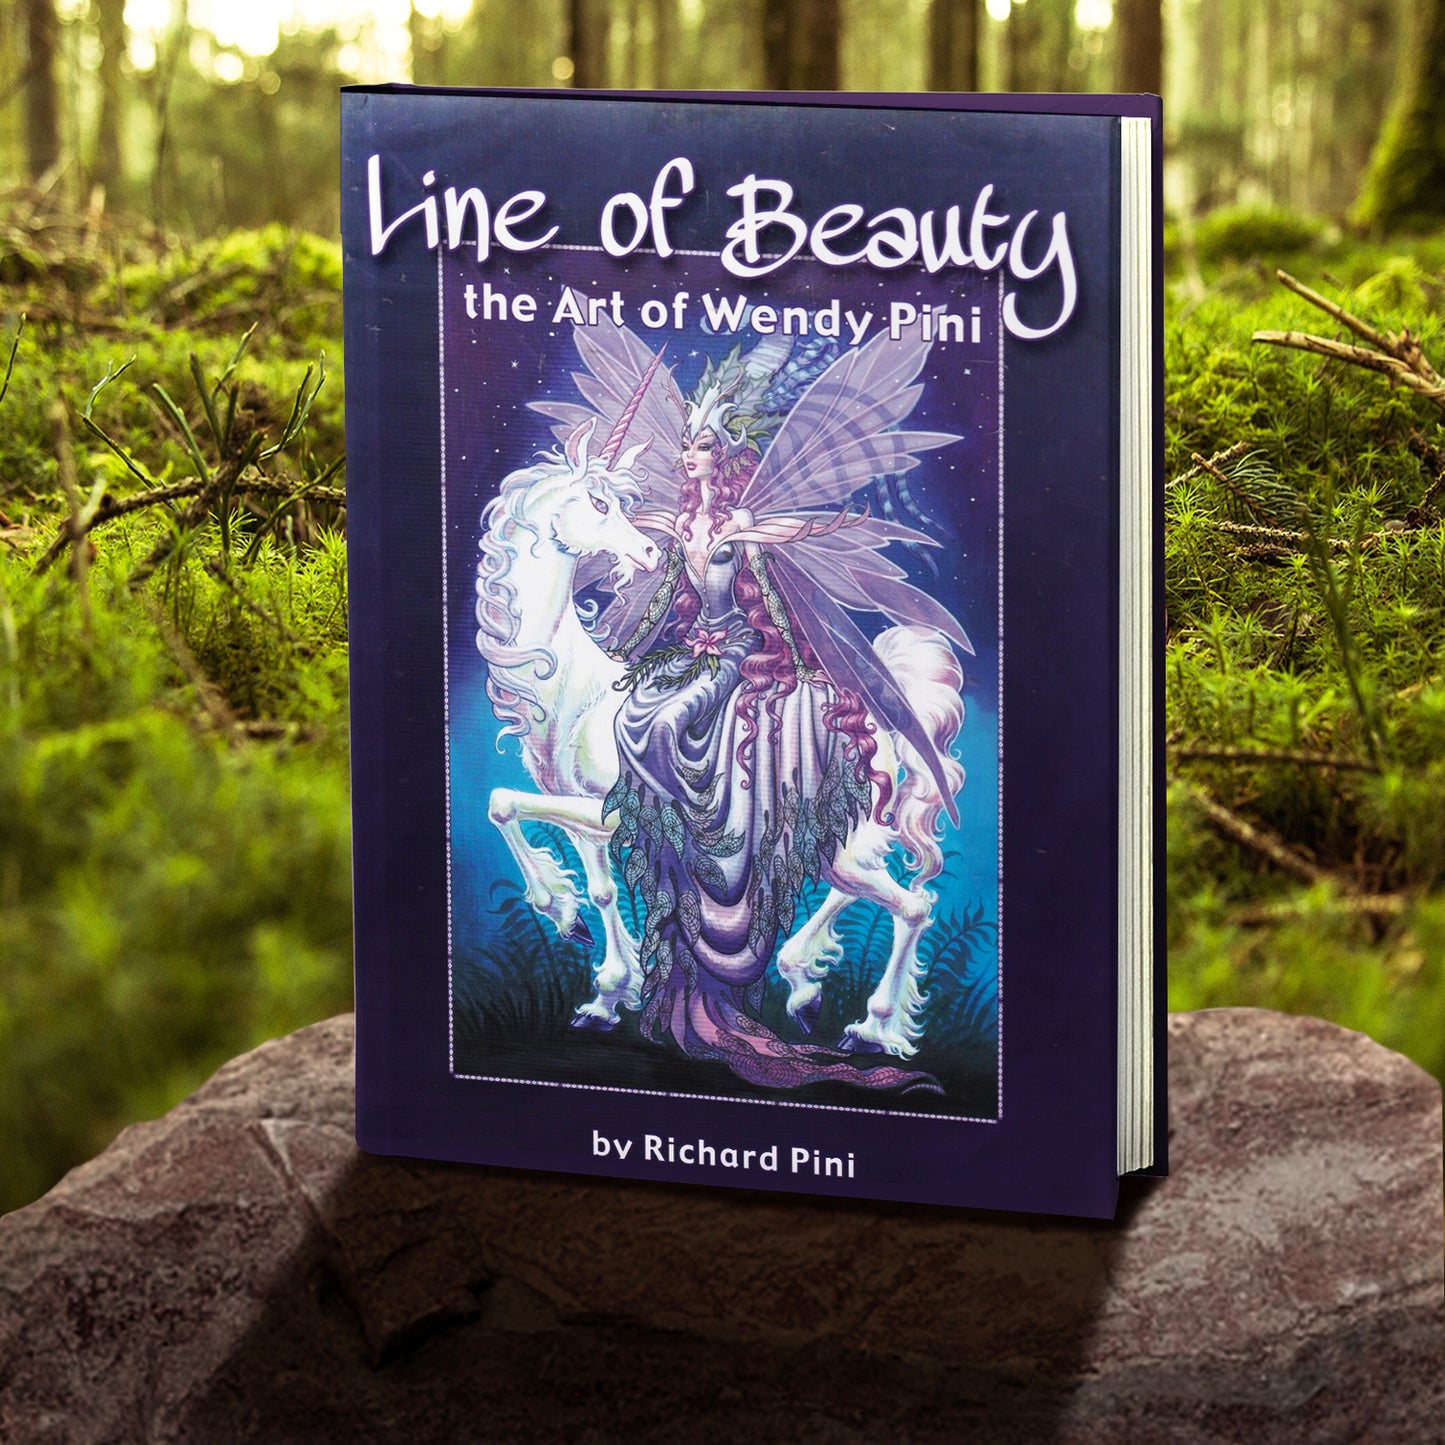 A copy of "Line of Beauty: The Art of Wendy Pini by Richard Pini" pictured in a forest. The cover is purple and features a fairy and unicorn on the front. 